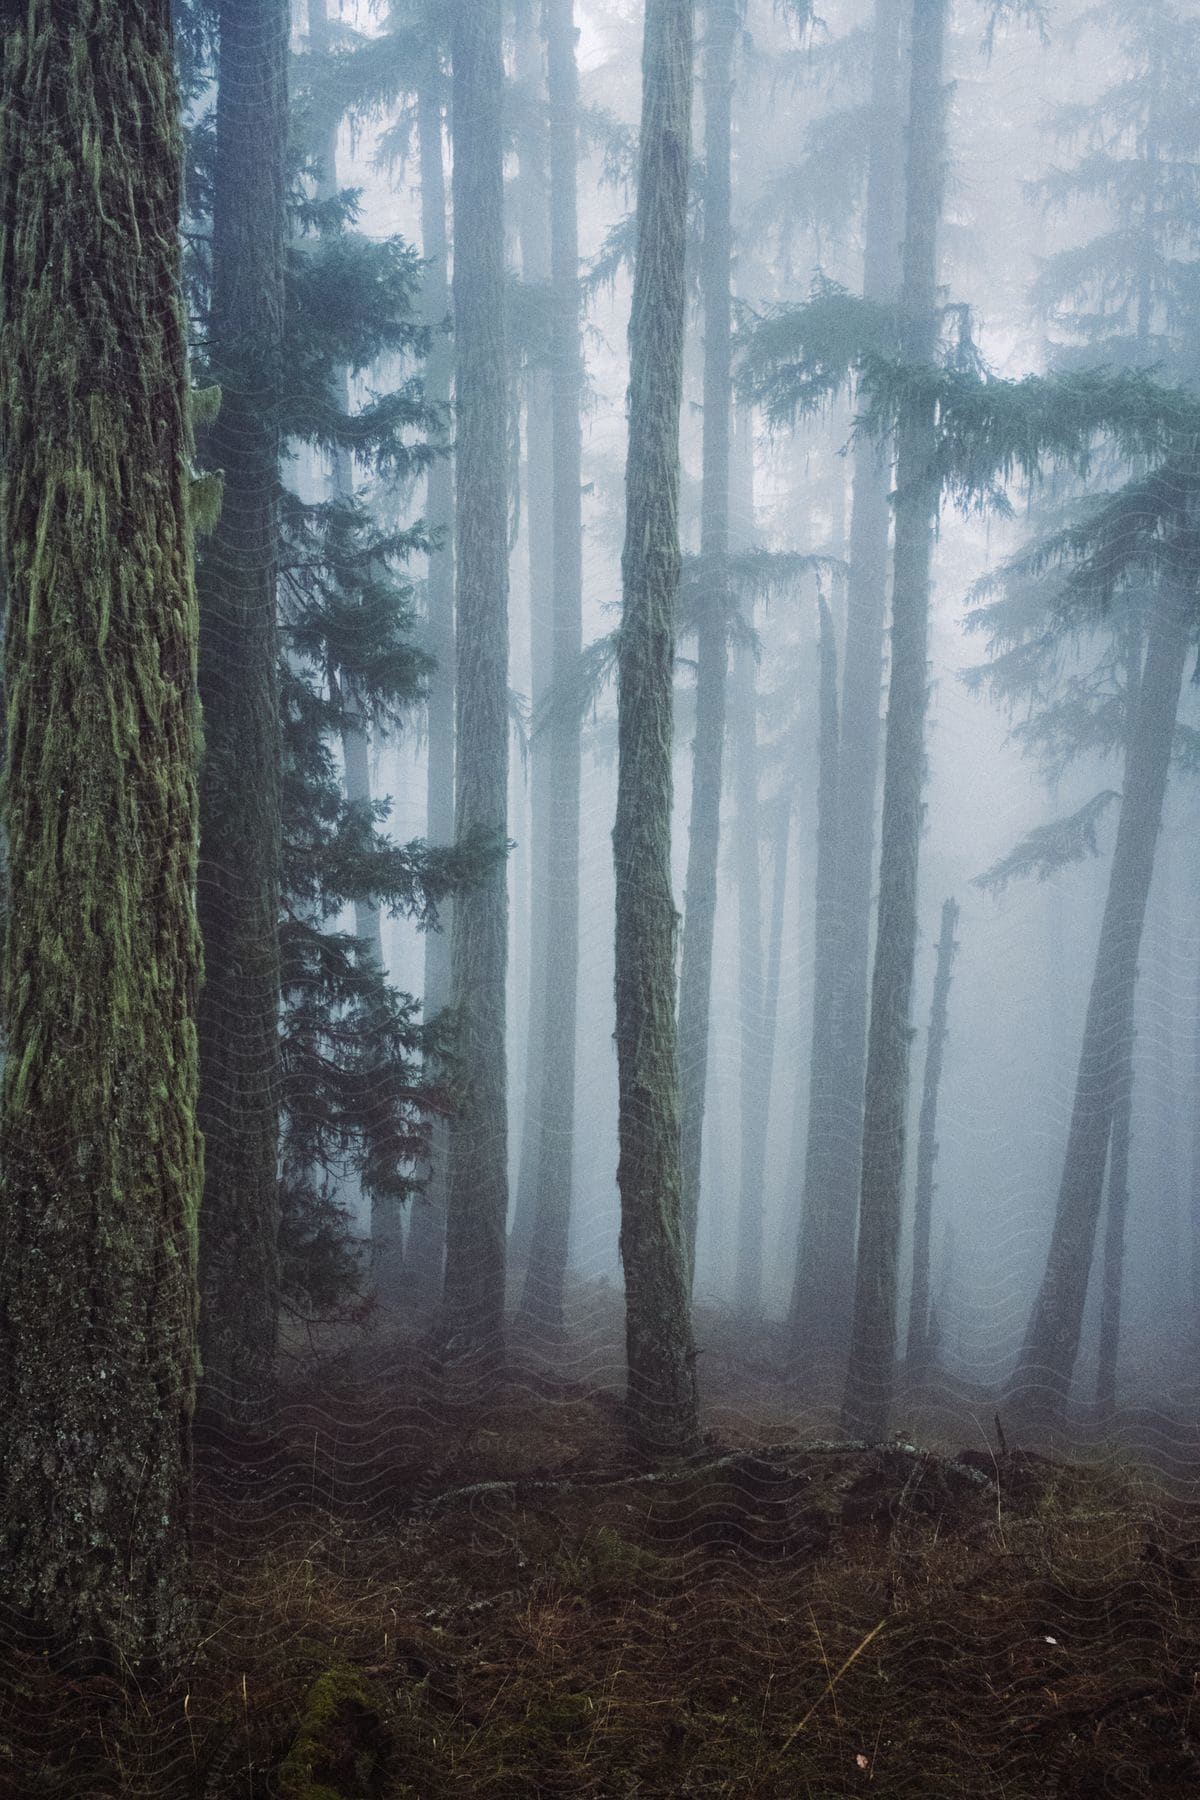 Several tall thin trees in a patch of forest with a foggy sky behind them